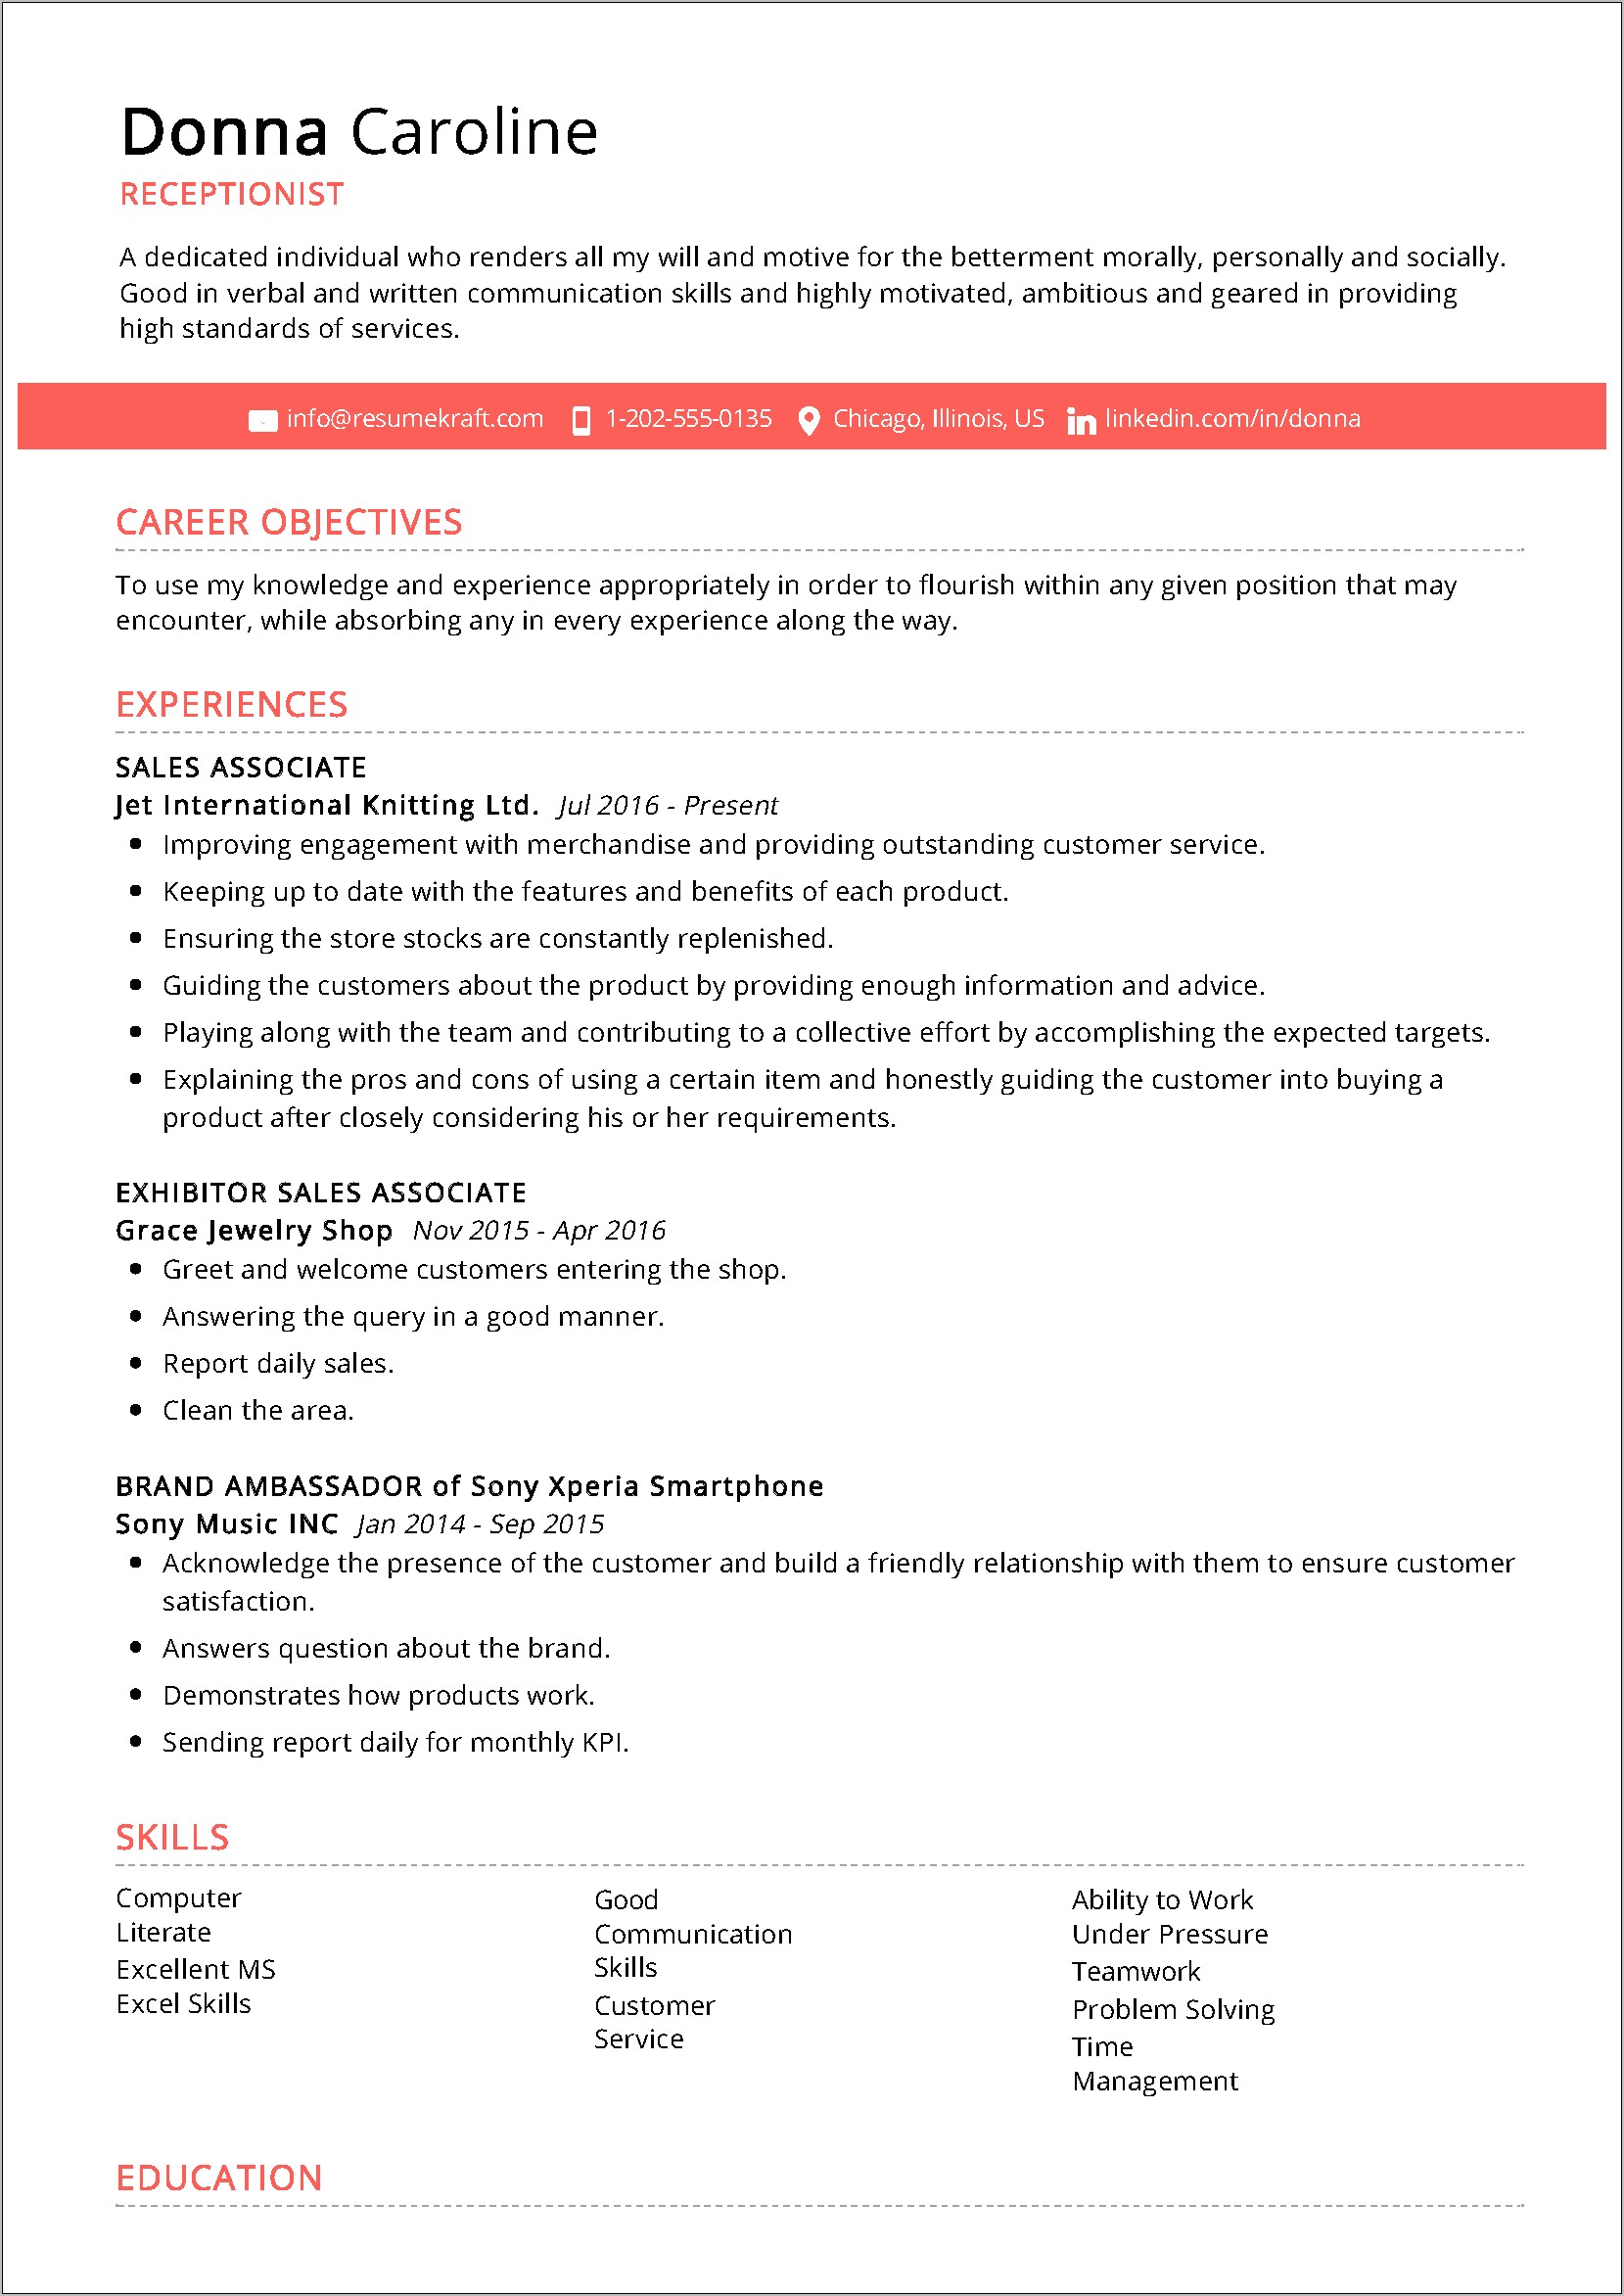 Skills To List On Resume For Receptionist